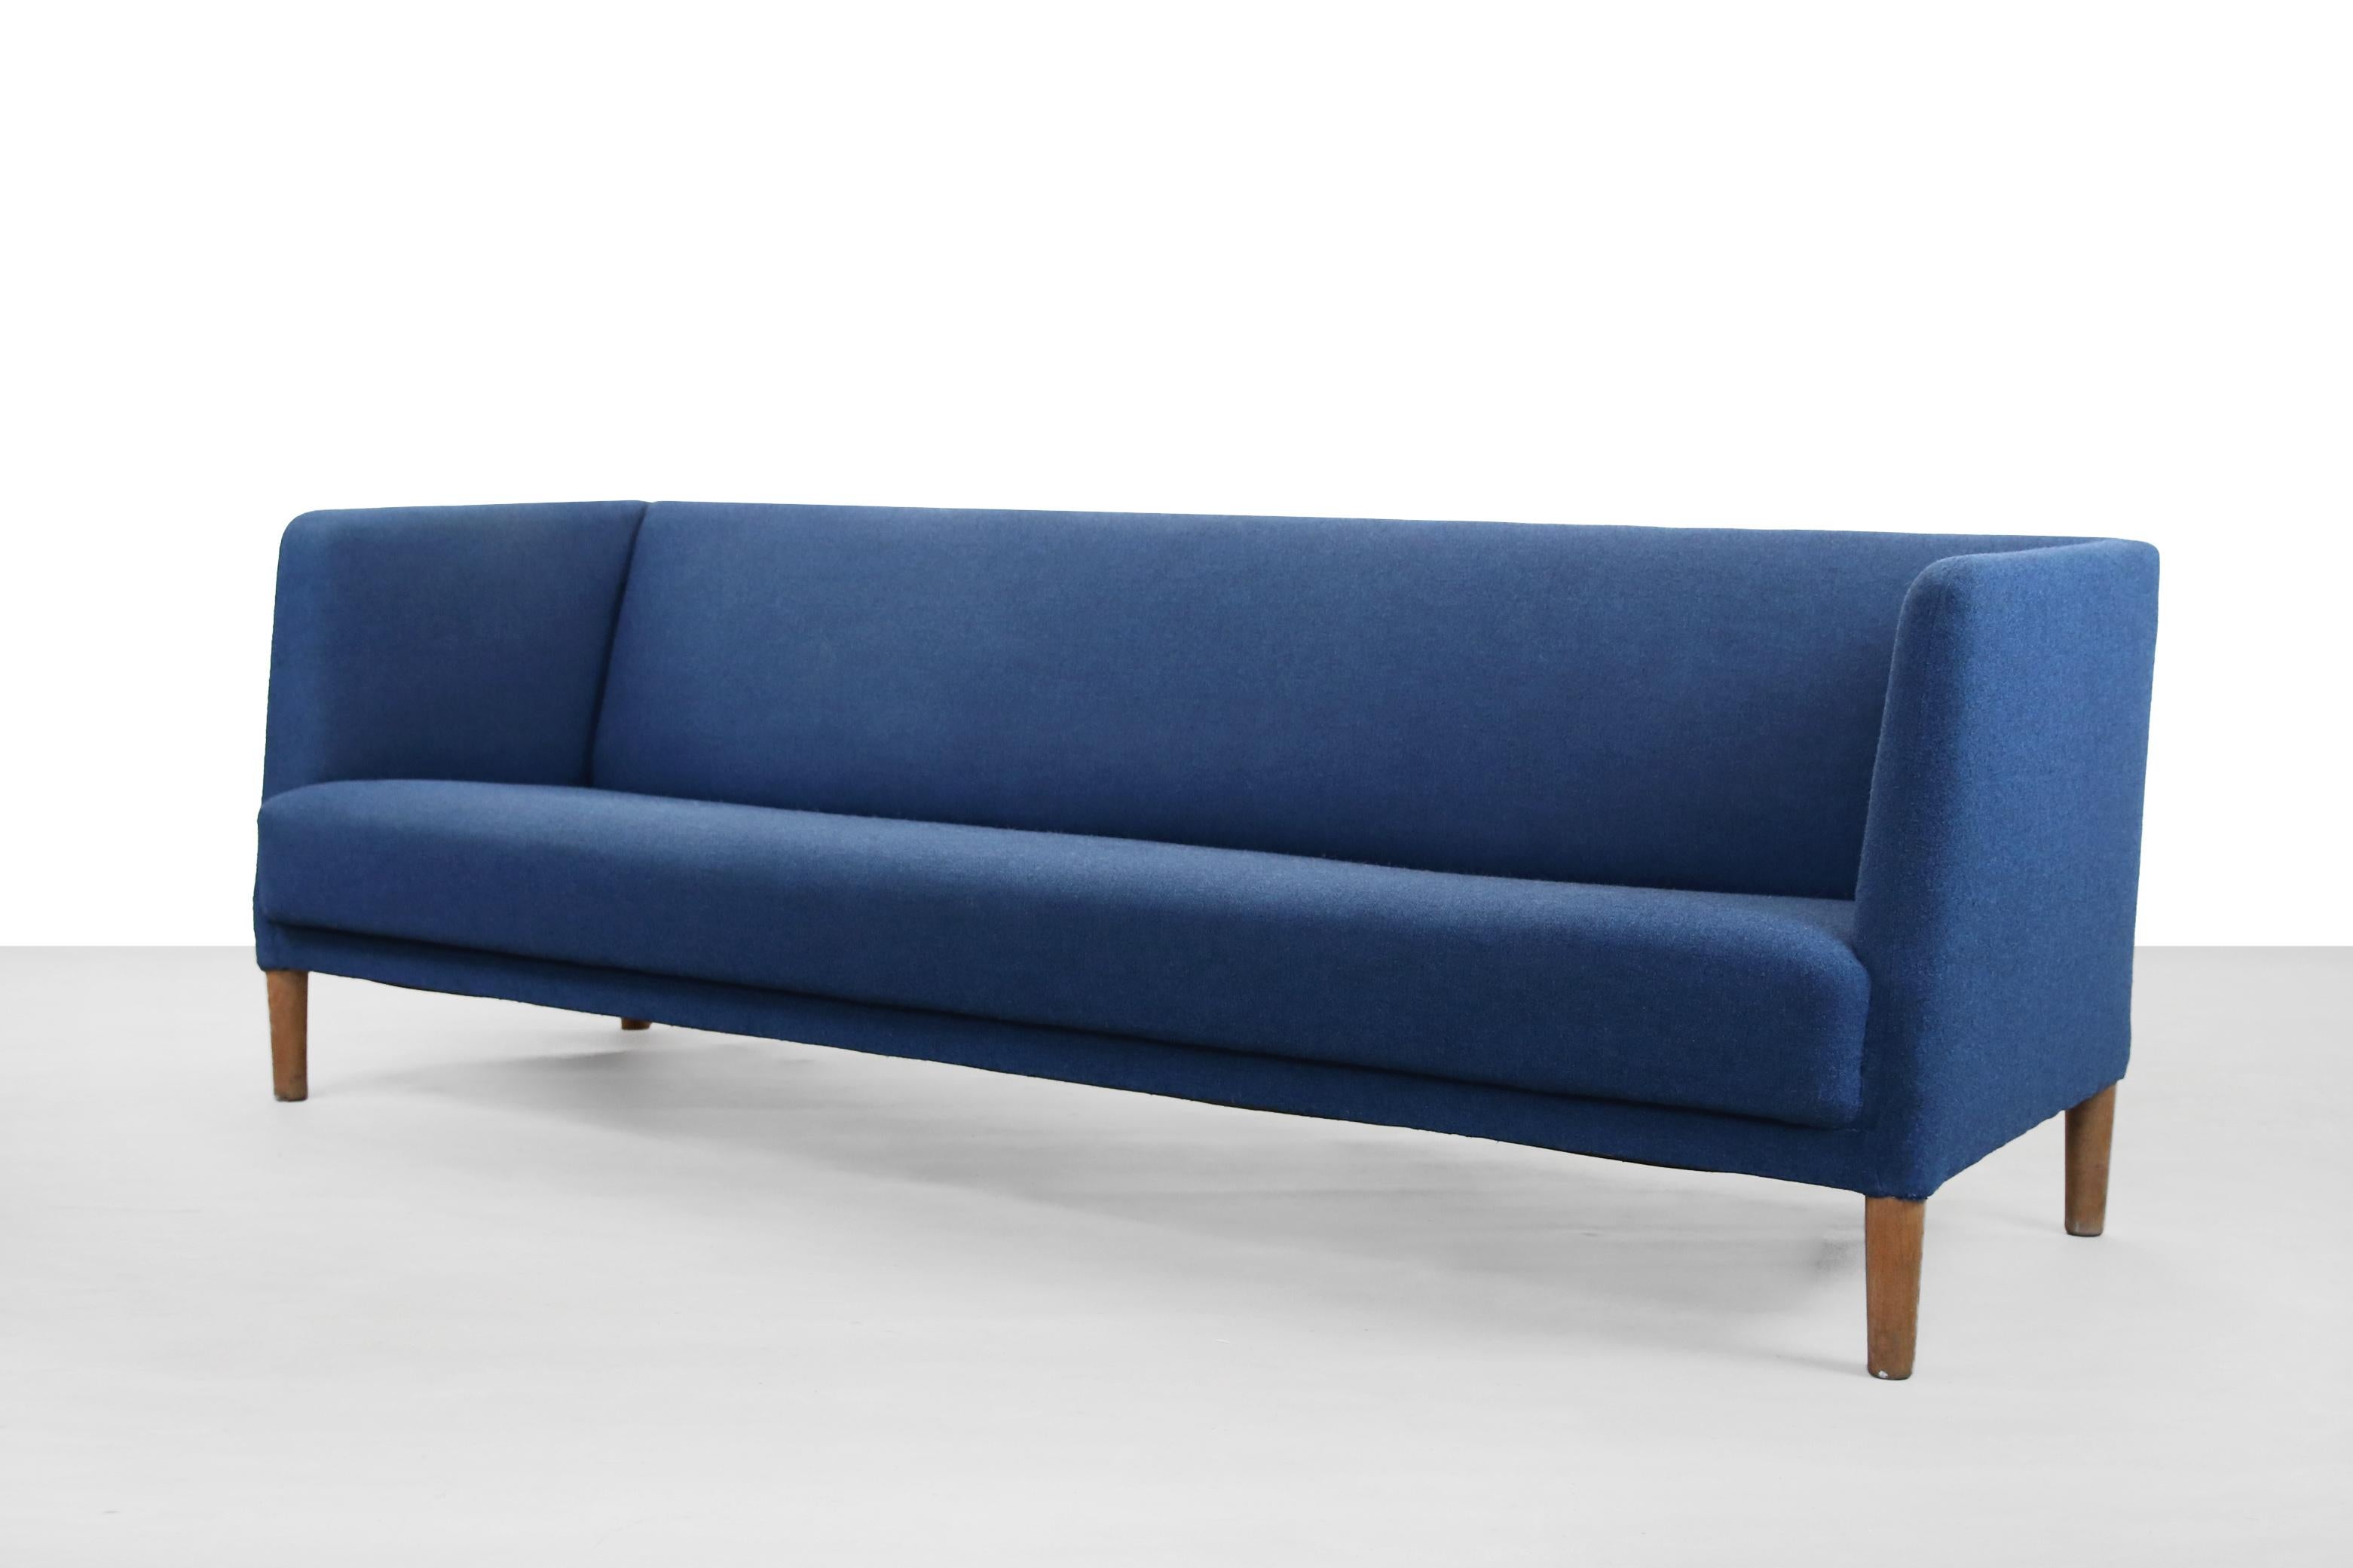 Danish modernist sofa designed by famous designer Hans J. Wegner and produced by Johannes Hansen in the 1950s in Denmark. The sofa has solid oak legs and is upholstered in blue wool fabric from Kvadrat Tonica 2 color 773. This beautiful sofa Model